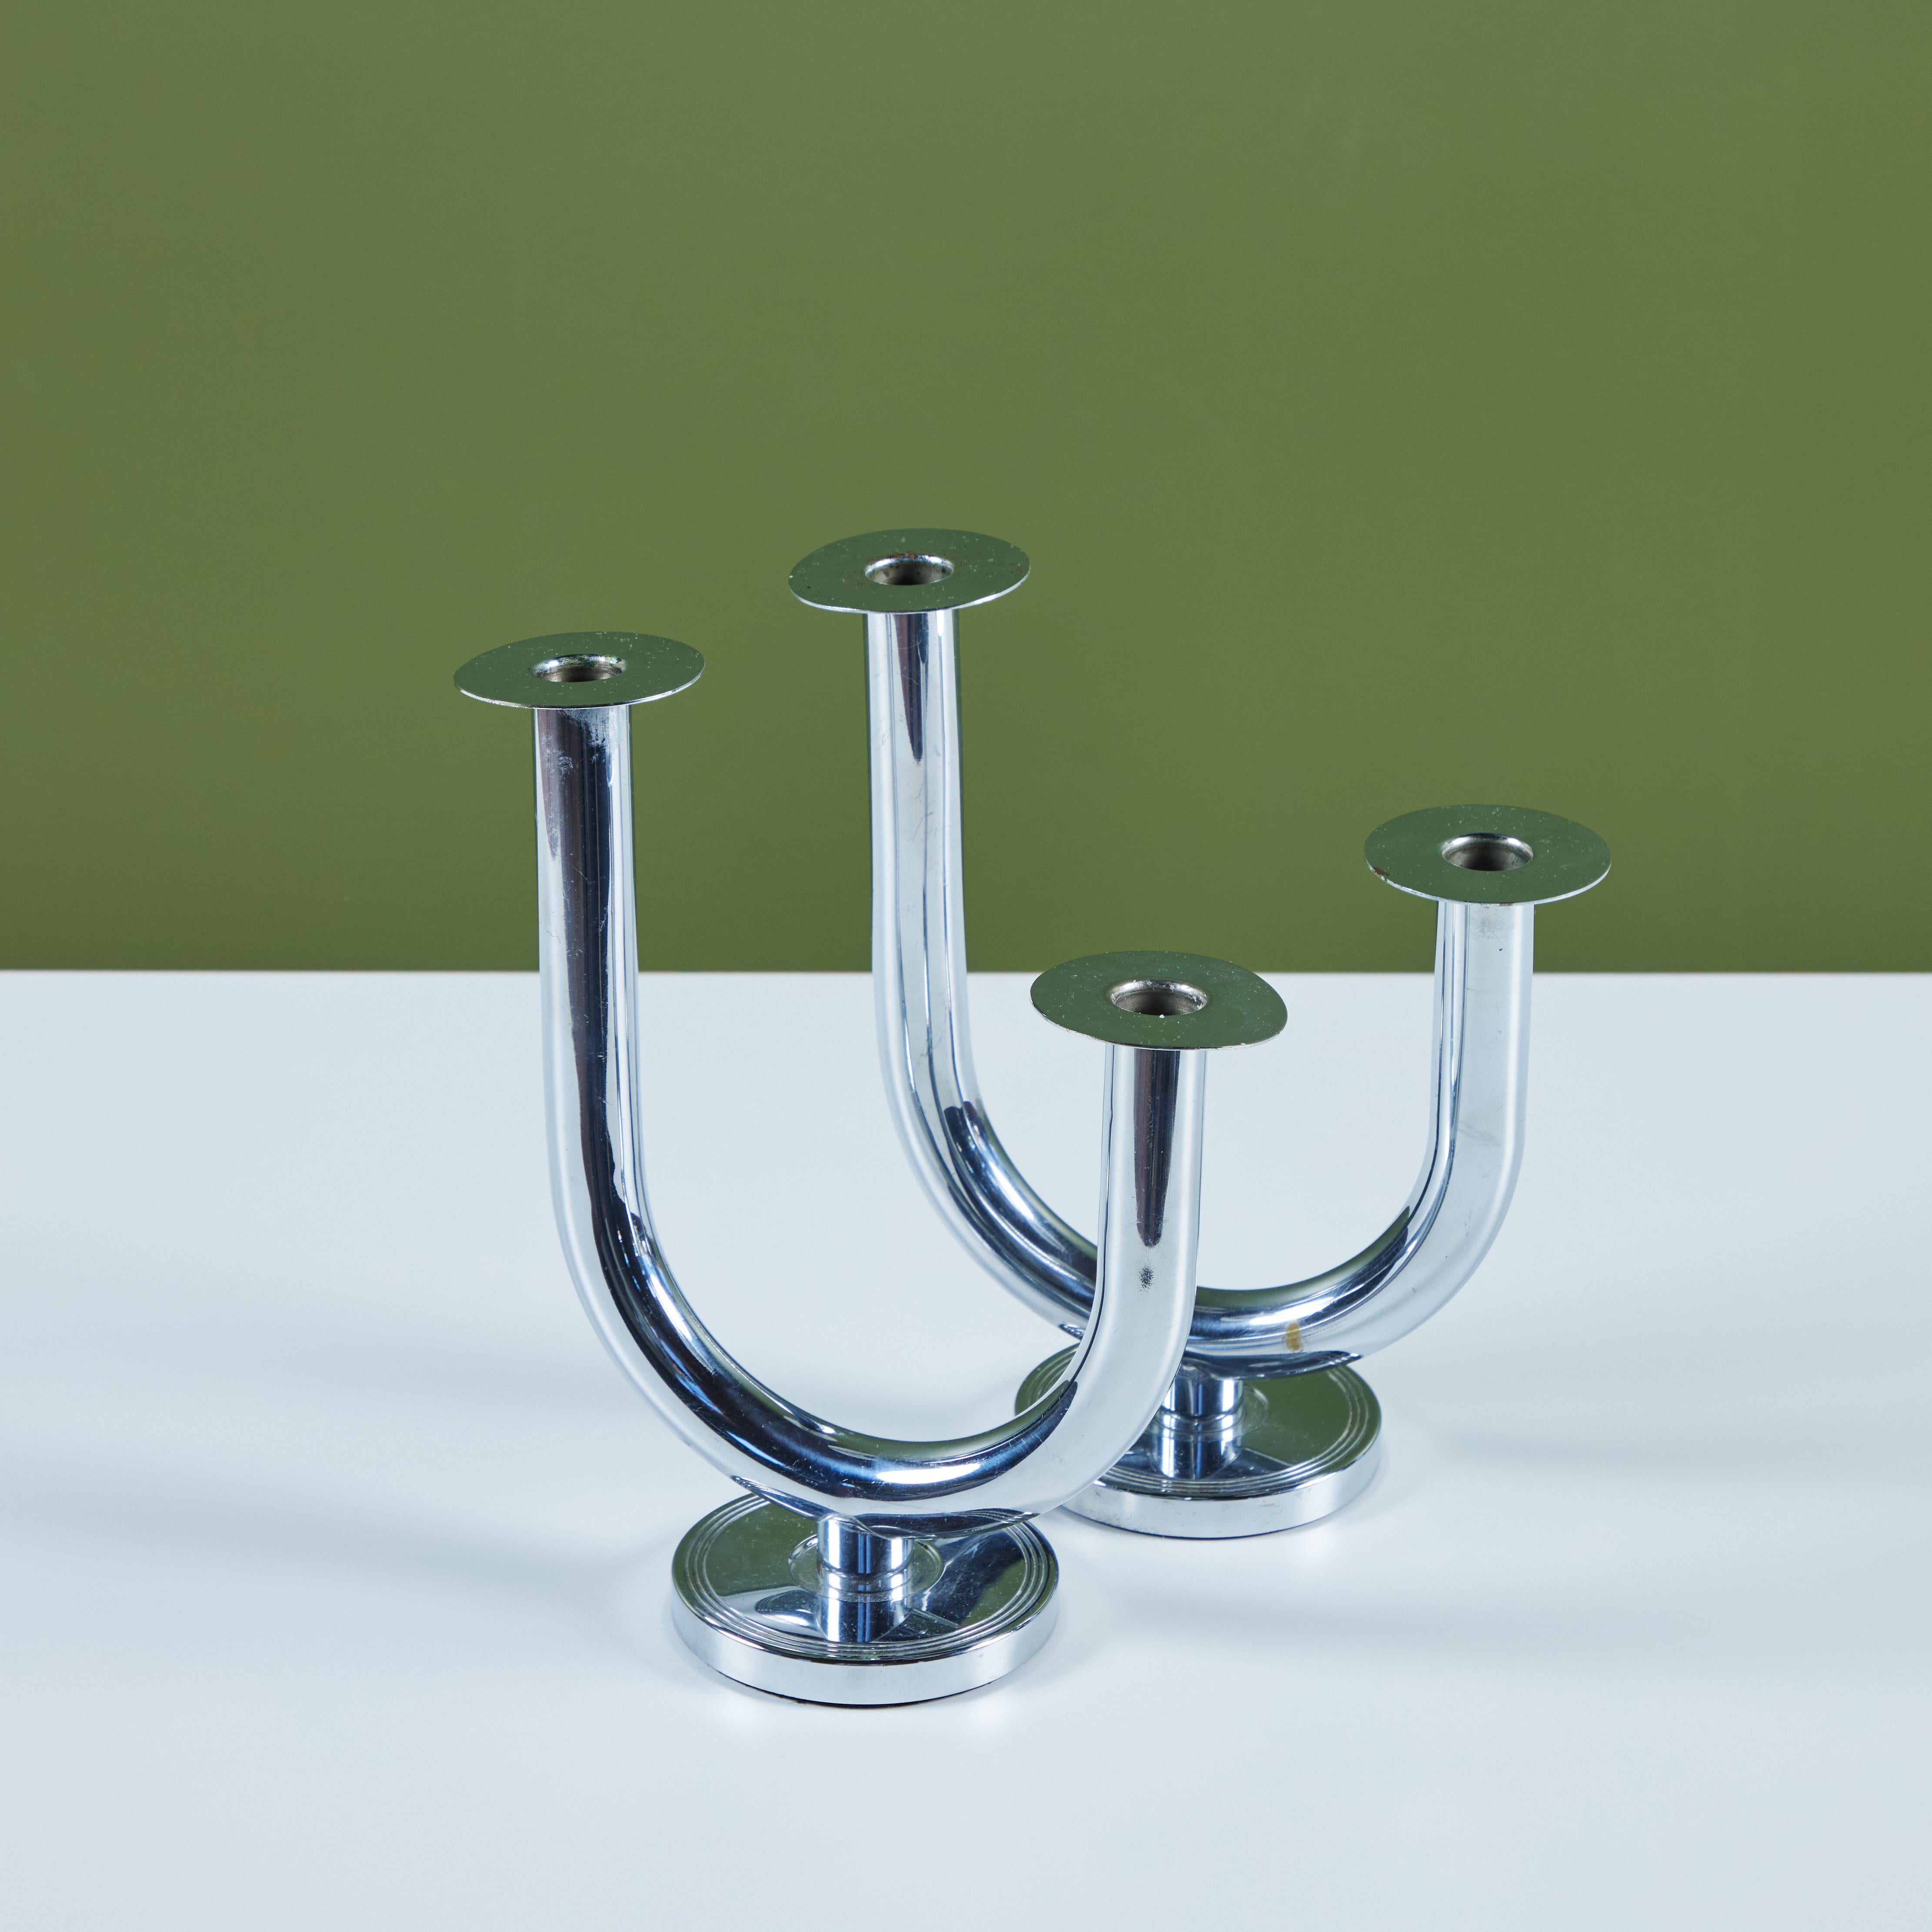 Pair of chrome candle holders by Walter Von Nessen for Chase Brass and Copper Company of Connecticut, c.1930s, USA. The pair of Art Deco candle sticks feature a 